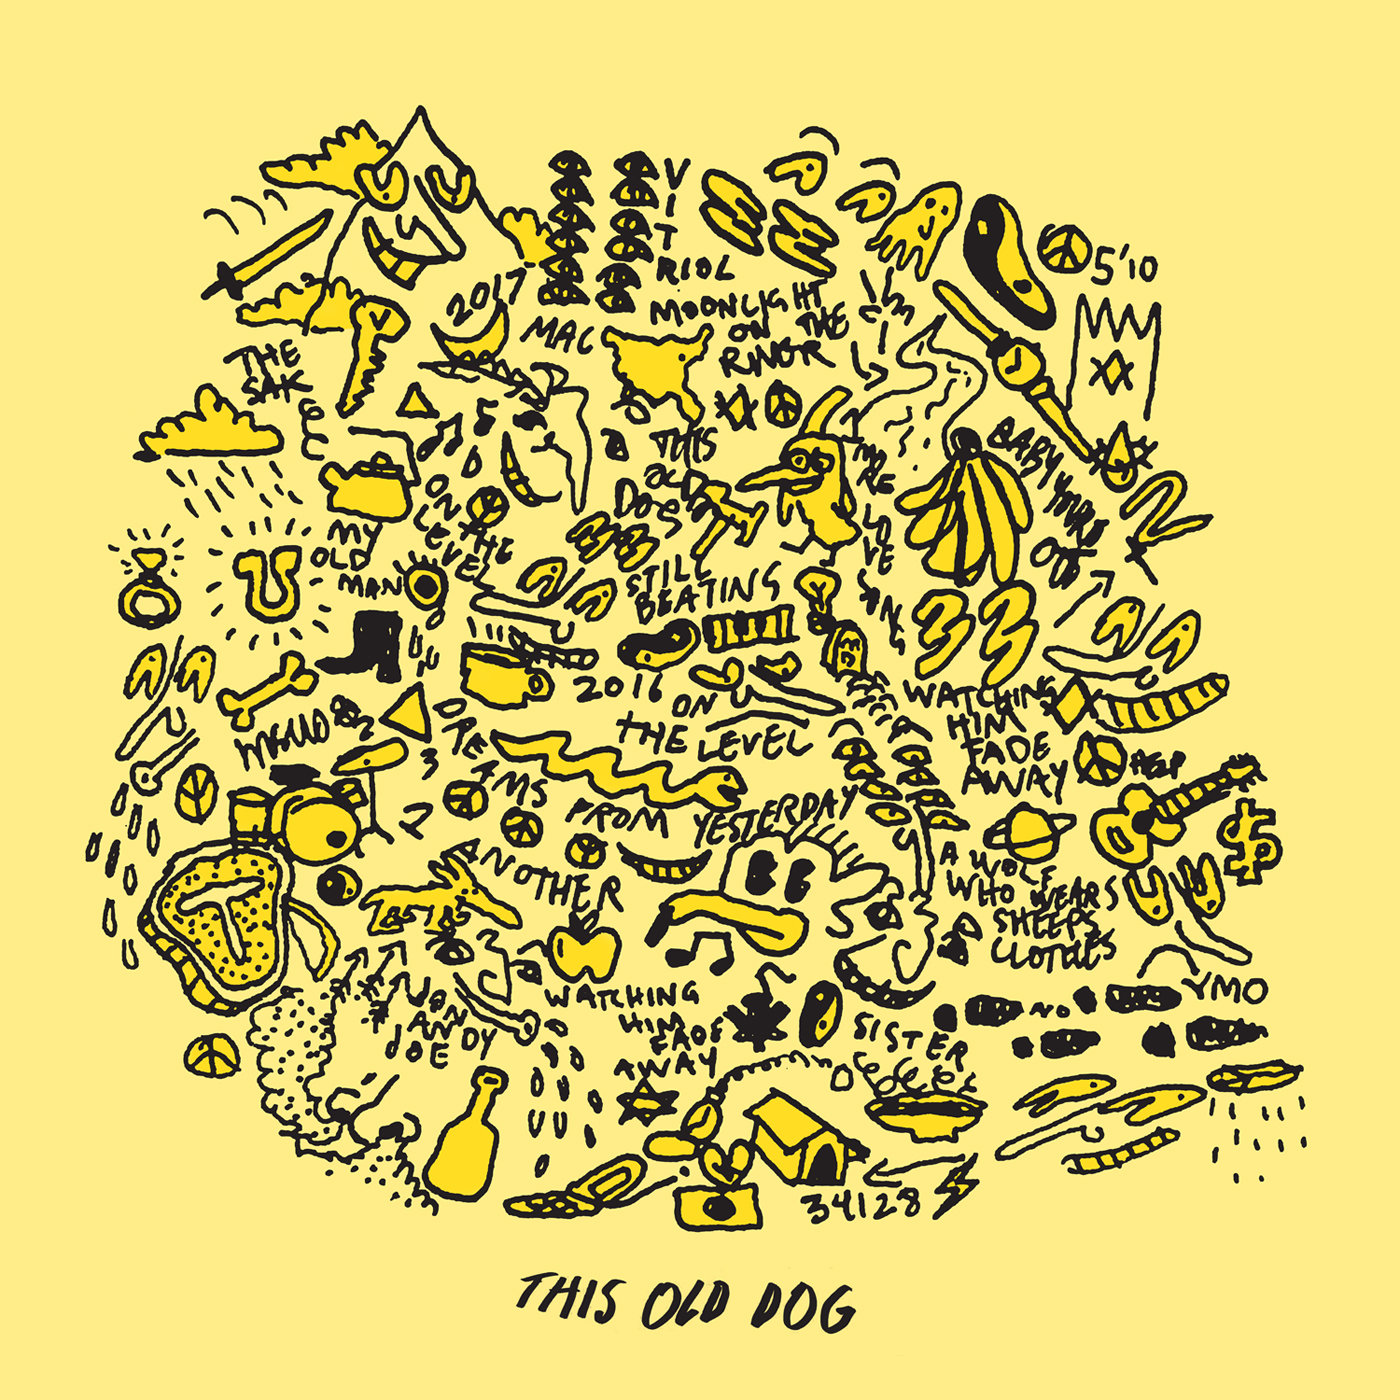 Mac DeMarco Announces New Album <i></noscript>This Old Dog</i>, Shares Title Track and “My Old Man”” title=”mac demarco this old dog album art” data-original-id=”224747″ data-adjusted-id=”224747″ class=”sm_size_full_width sm_alignment_center ” /></p>
<p><strong>Mac DeMarco, <em>This Old Dog<br />
</em></strong>1. “My Old Man”<br />
2. “This Old Dog”<br />
3. “Baby You’re Out”<br />
4. “For the First Time”<br />
5. “One Another”<br />
6. “Still Beating”<br />
7. “Sister”<br />
8. “Dreams From Yesterday”<br />
9. “A Wolf Who Wears Sheeps Clothes”<br />
10. “One More Love Song”<br />
11. “On the Level”<br />
12. “Moonlight on the River”<br />
13. “Watching Him Fade Away”</p>
</p></p>    <div class=